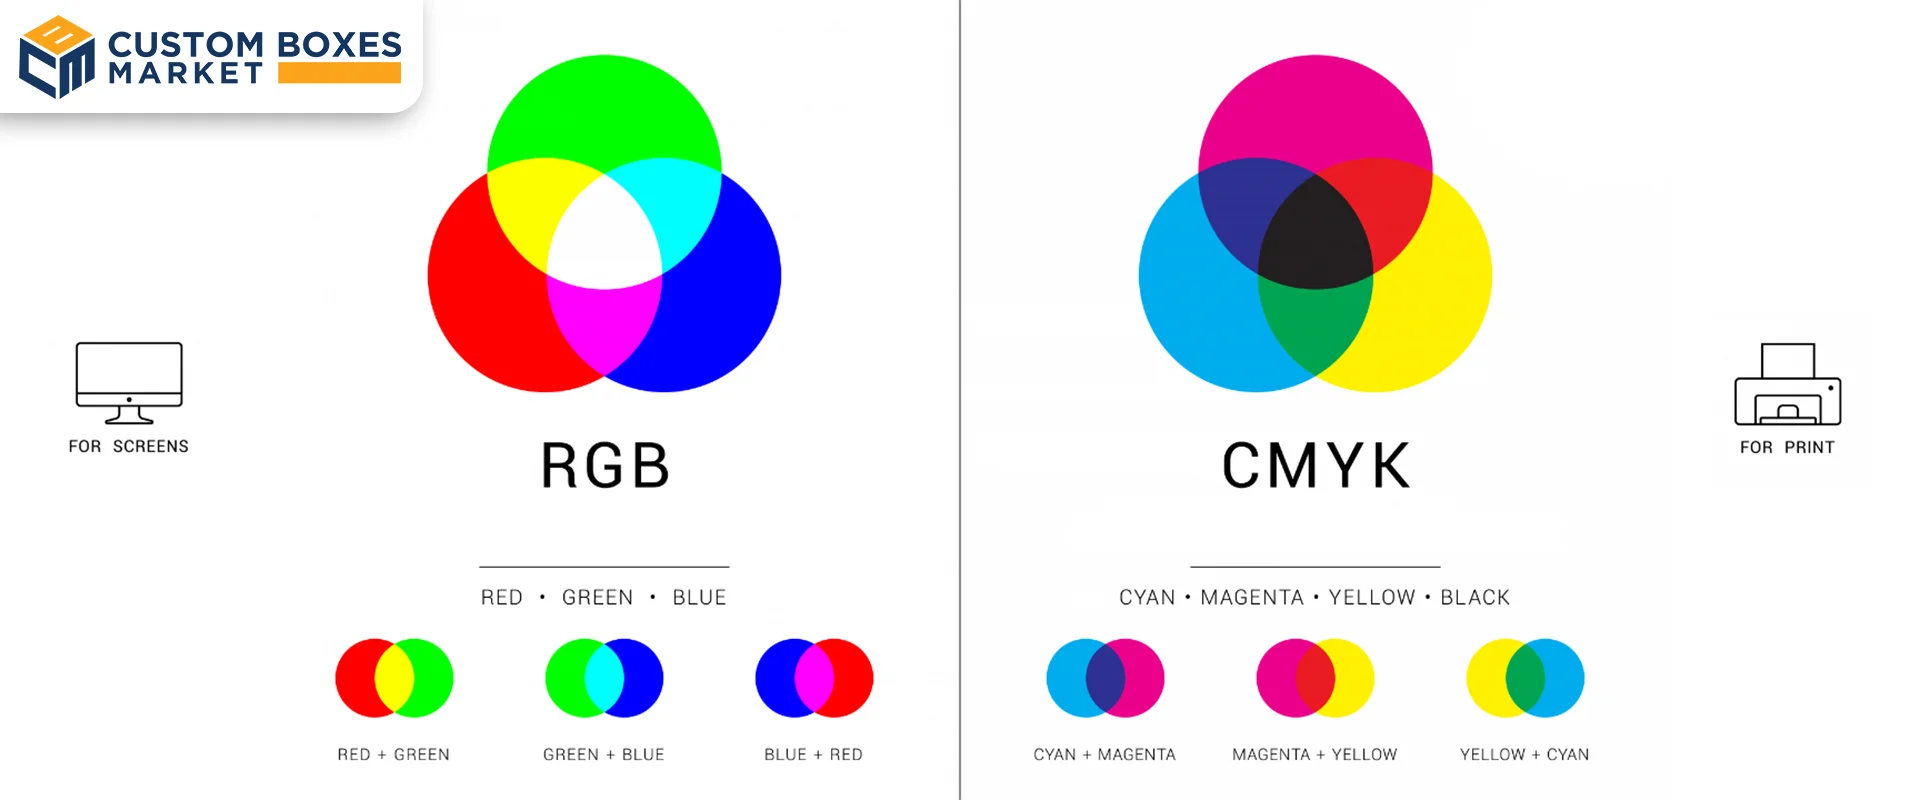 CMYK Vs RGB, What Is Better For Prints?